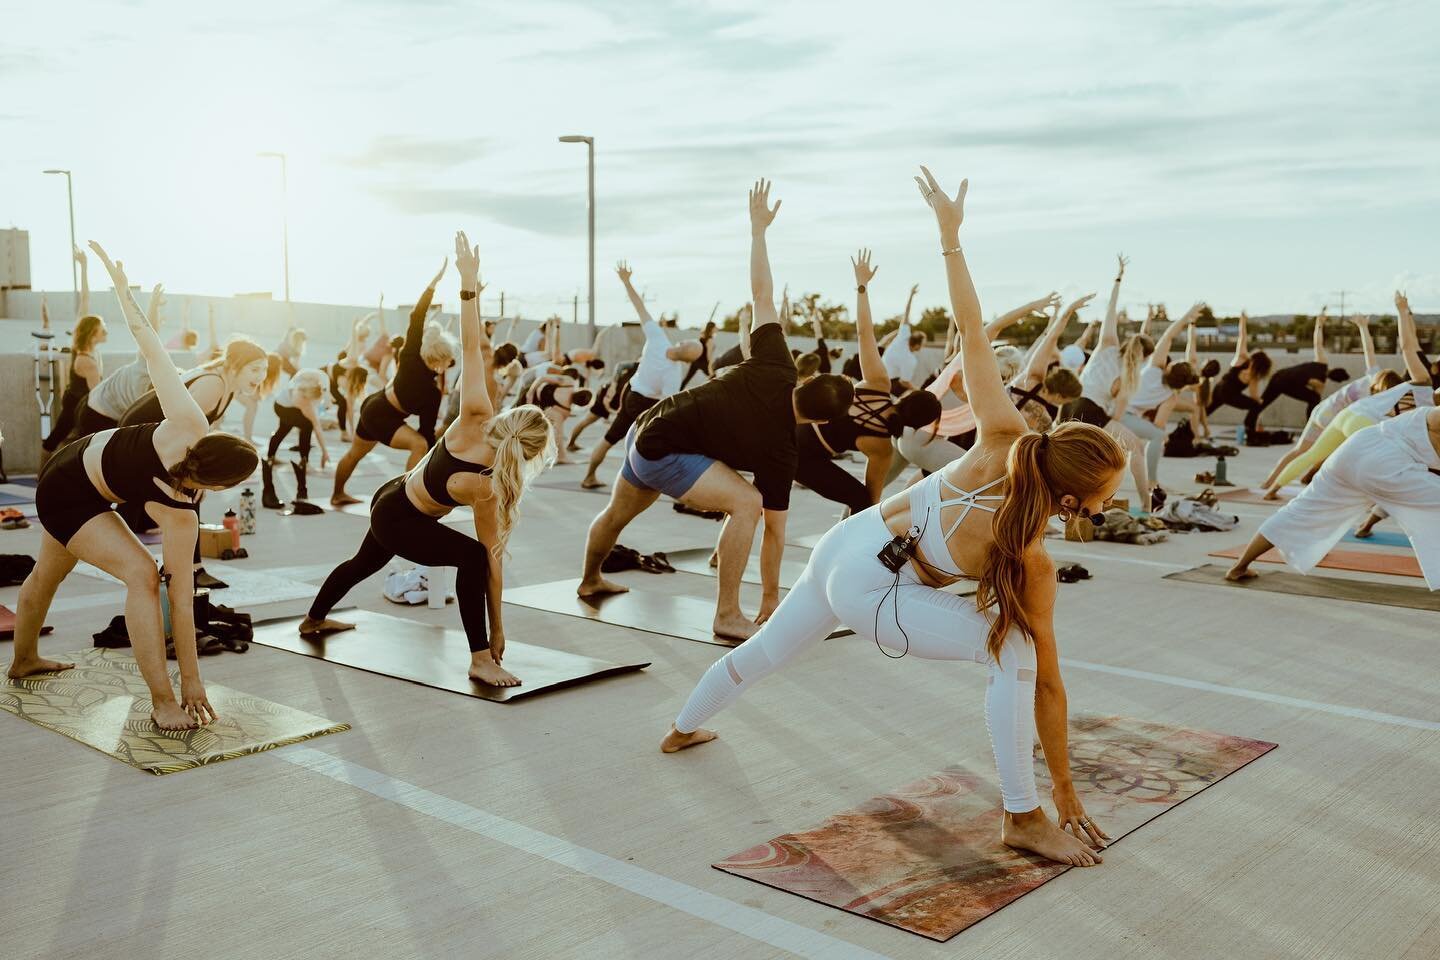 ‼️NEW EVENT ON SUNDAY‼️

We are so excited to host @angela_boulet for ROOFTOP YOGA 🧘&zwj;♀️ this SUNDAY at 6pm!!!

What better way to enjoy your evening then participating in restorative, strengthening, and meditating those Sunday-scarried or after 